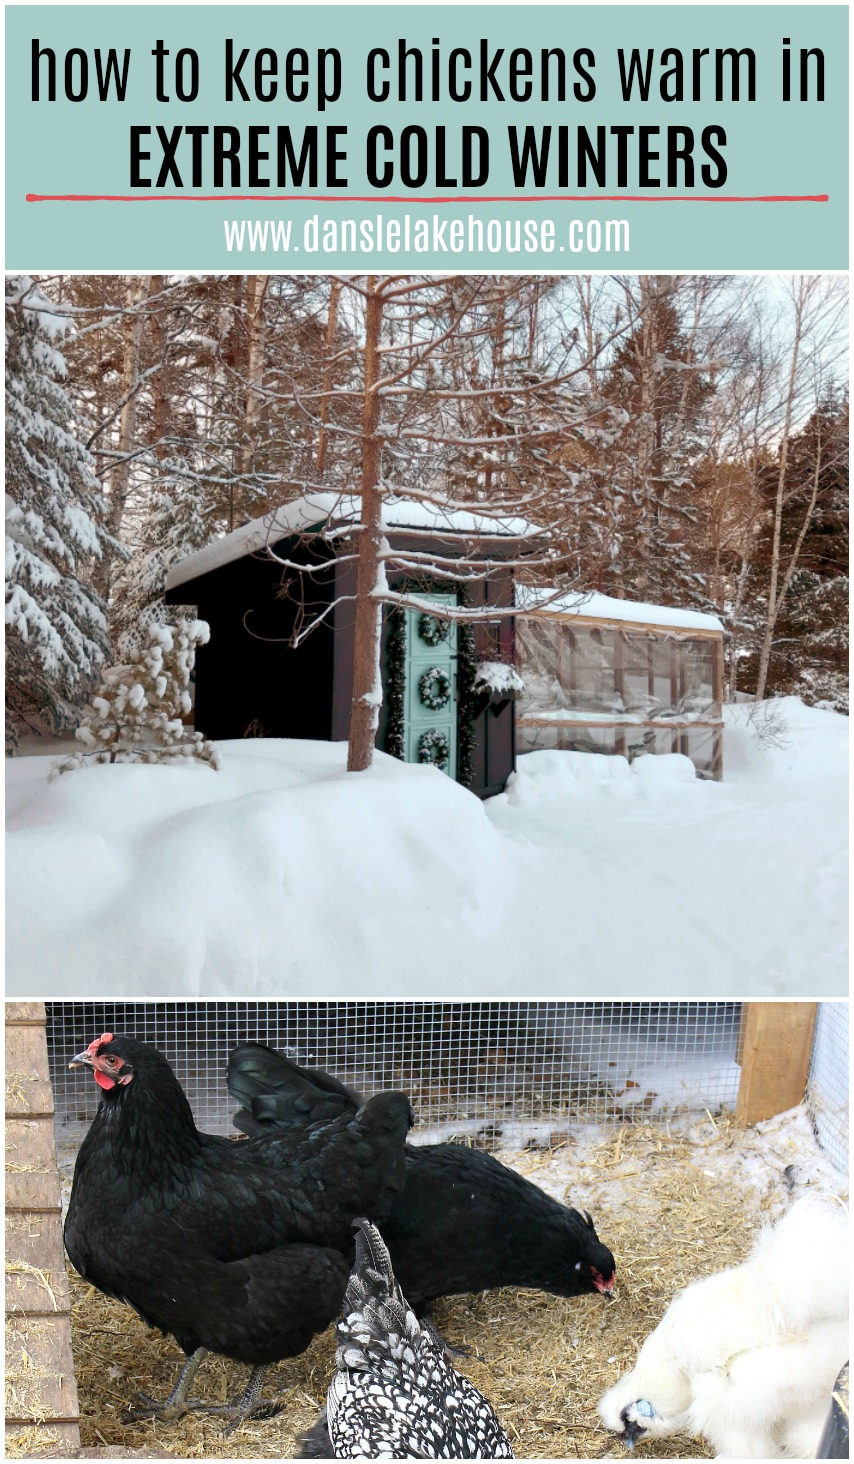 how to keep chickens warm in extreme cold winters